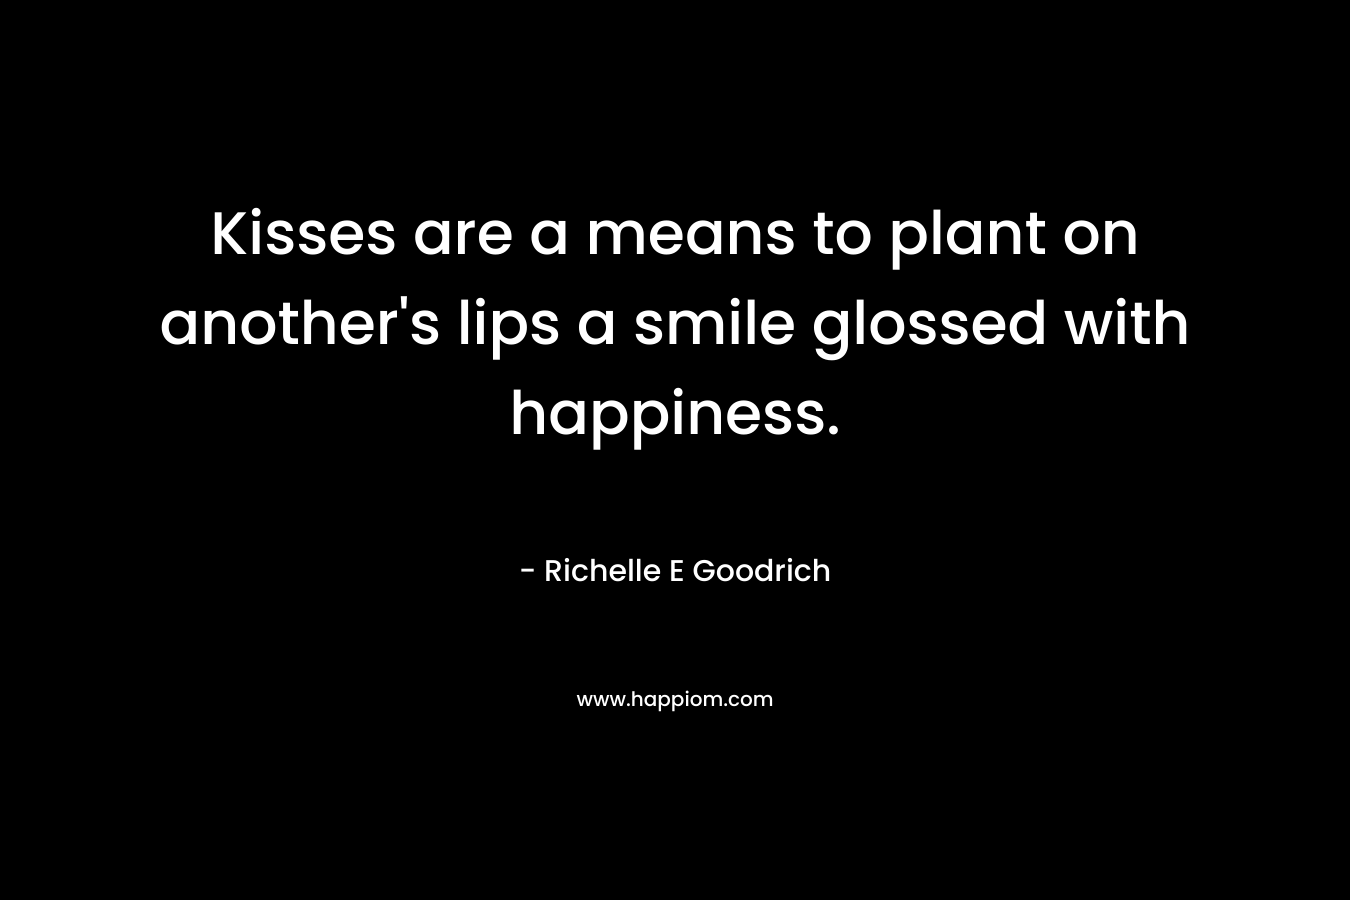 Kisses are a means to plant on another's lips a smile glossed with happiness.